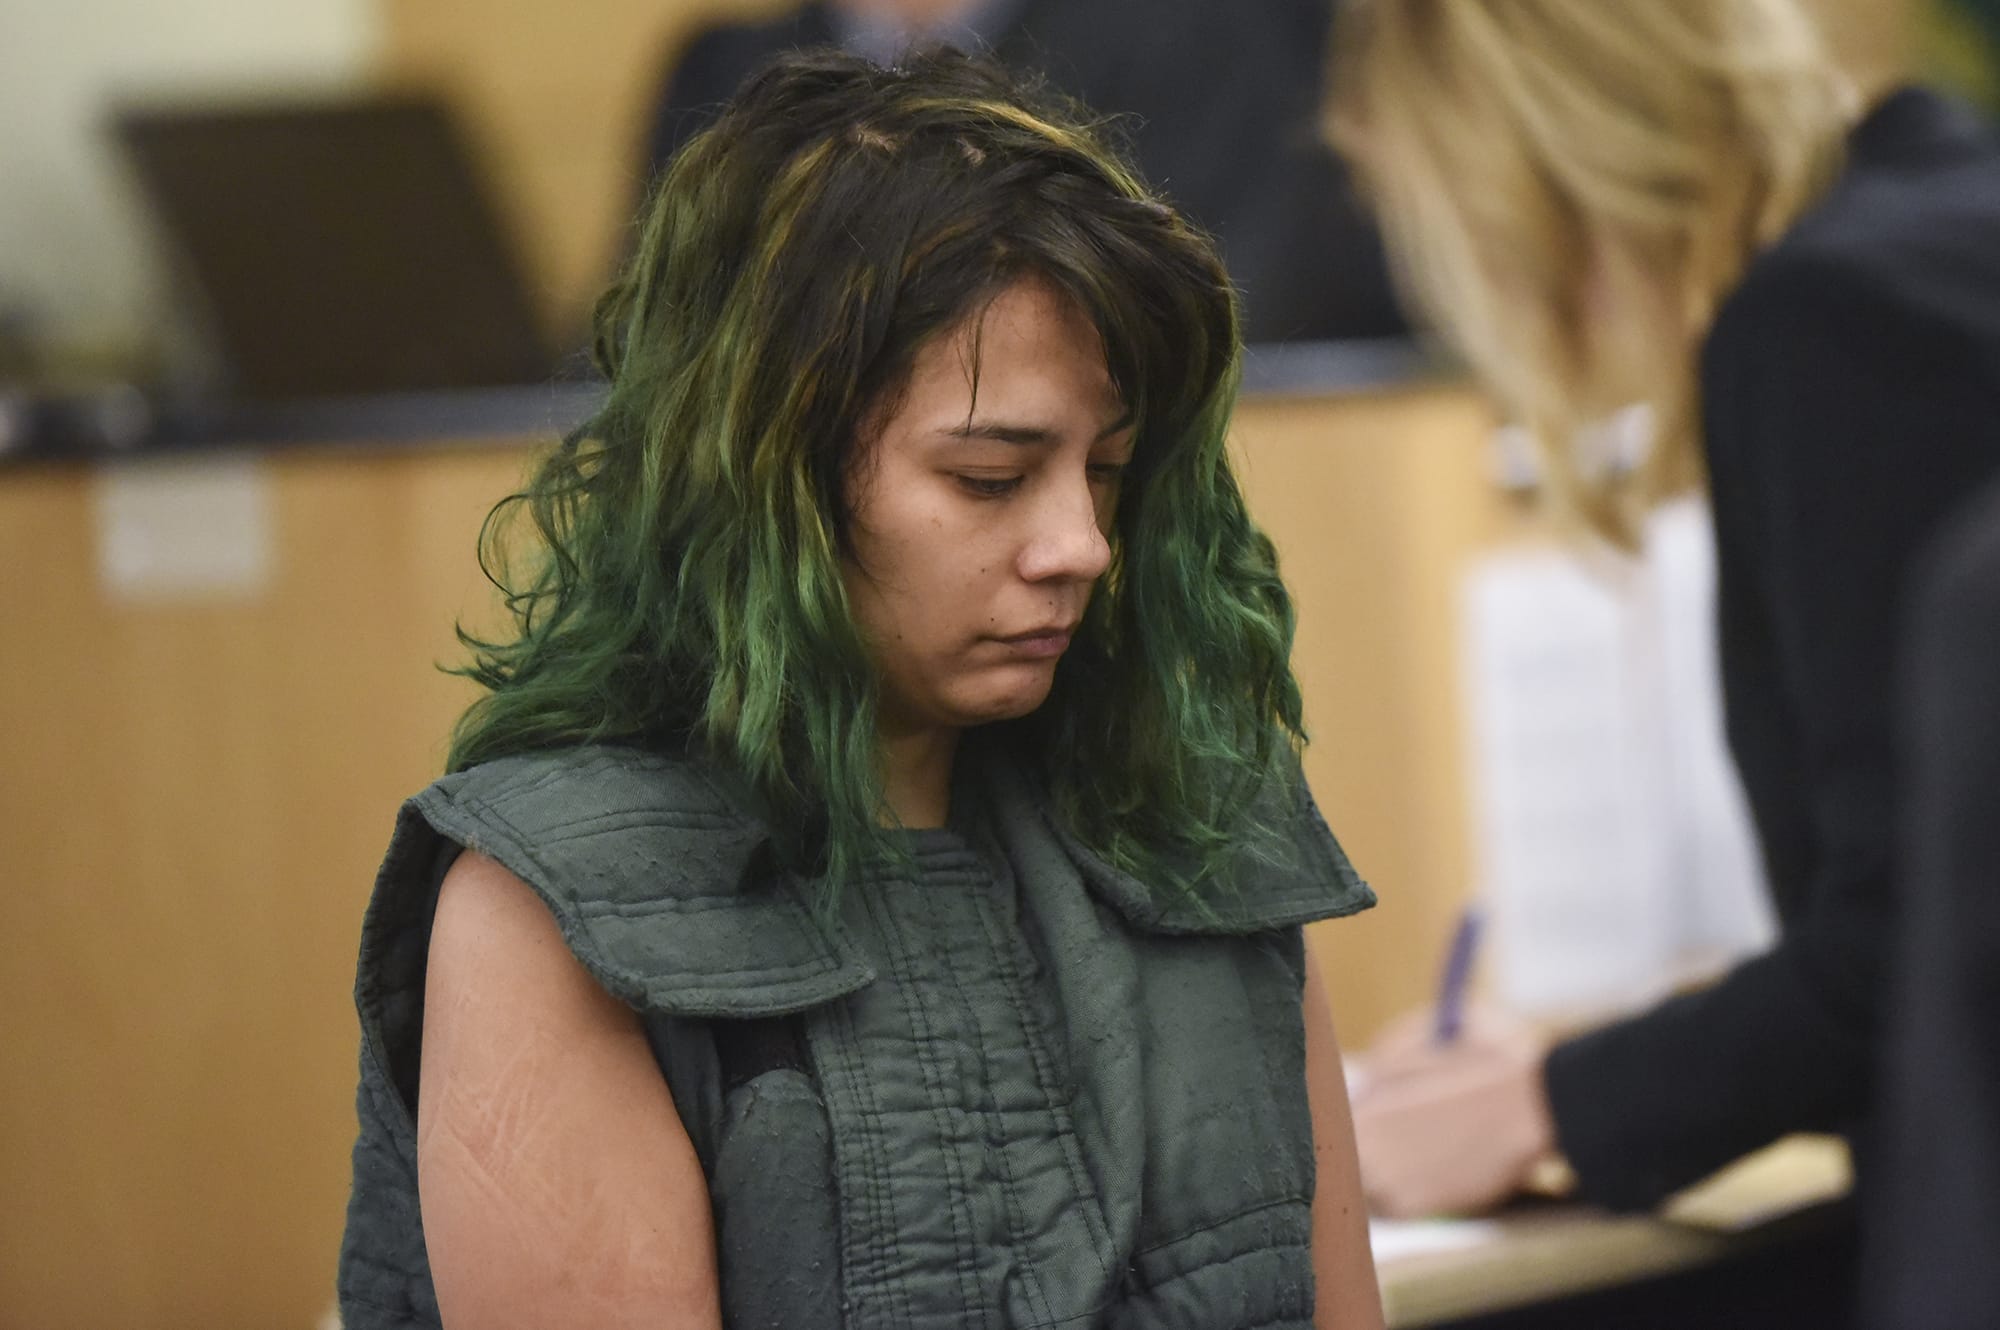 Emily Javier of Camas makes a first appearance Monday, March 5, 2018, in Clark County Superior Court on allegations that she stabbed her boyfriend with a samurai sword early Saturday morning at their home in Camas.